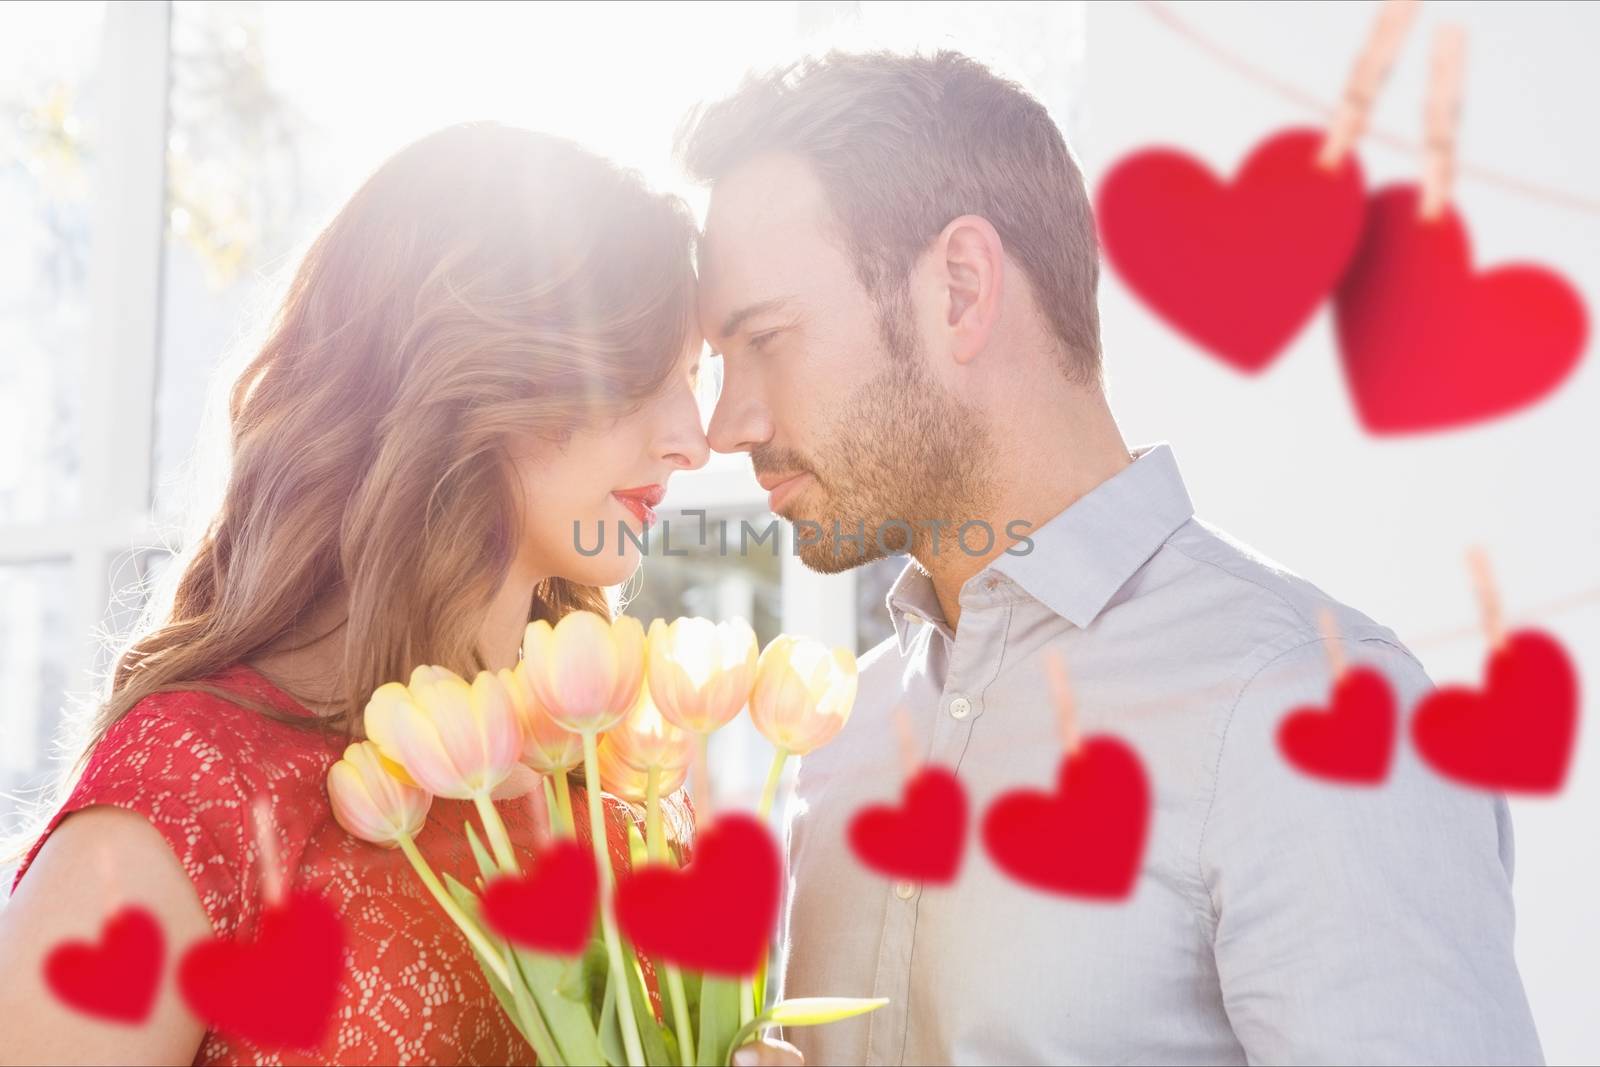 Couple embracing each other with red hanging hearts by Wavebreakmedia